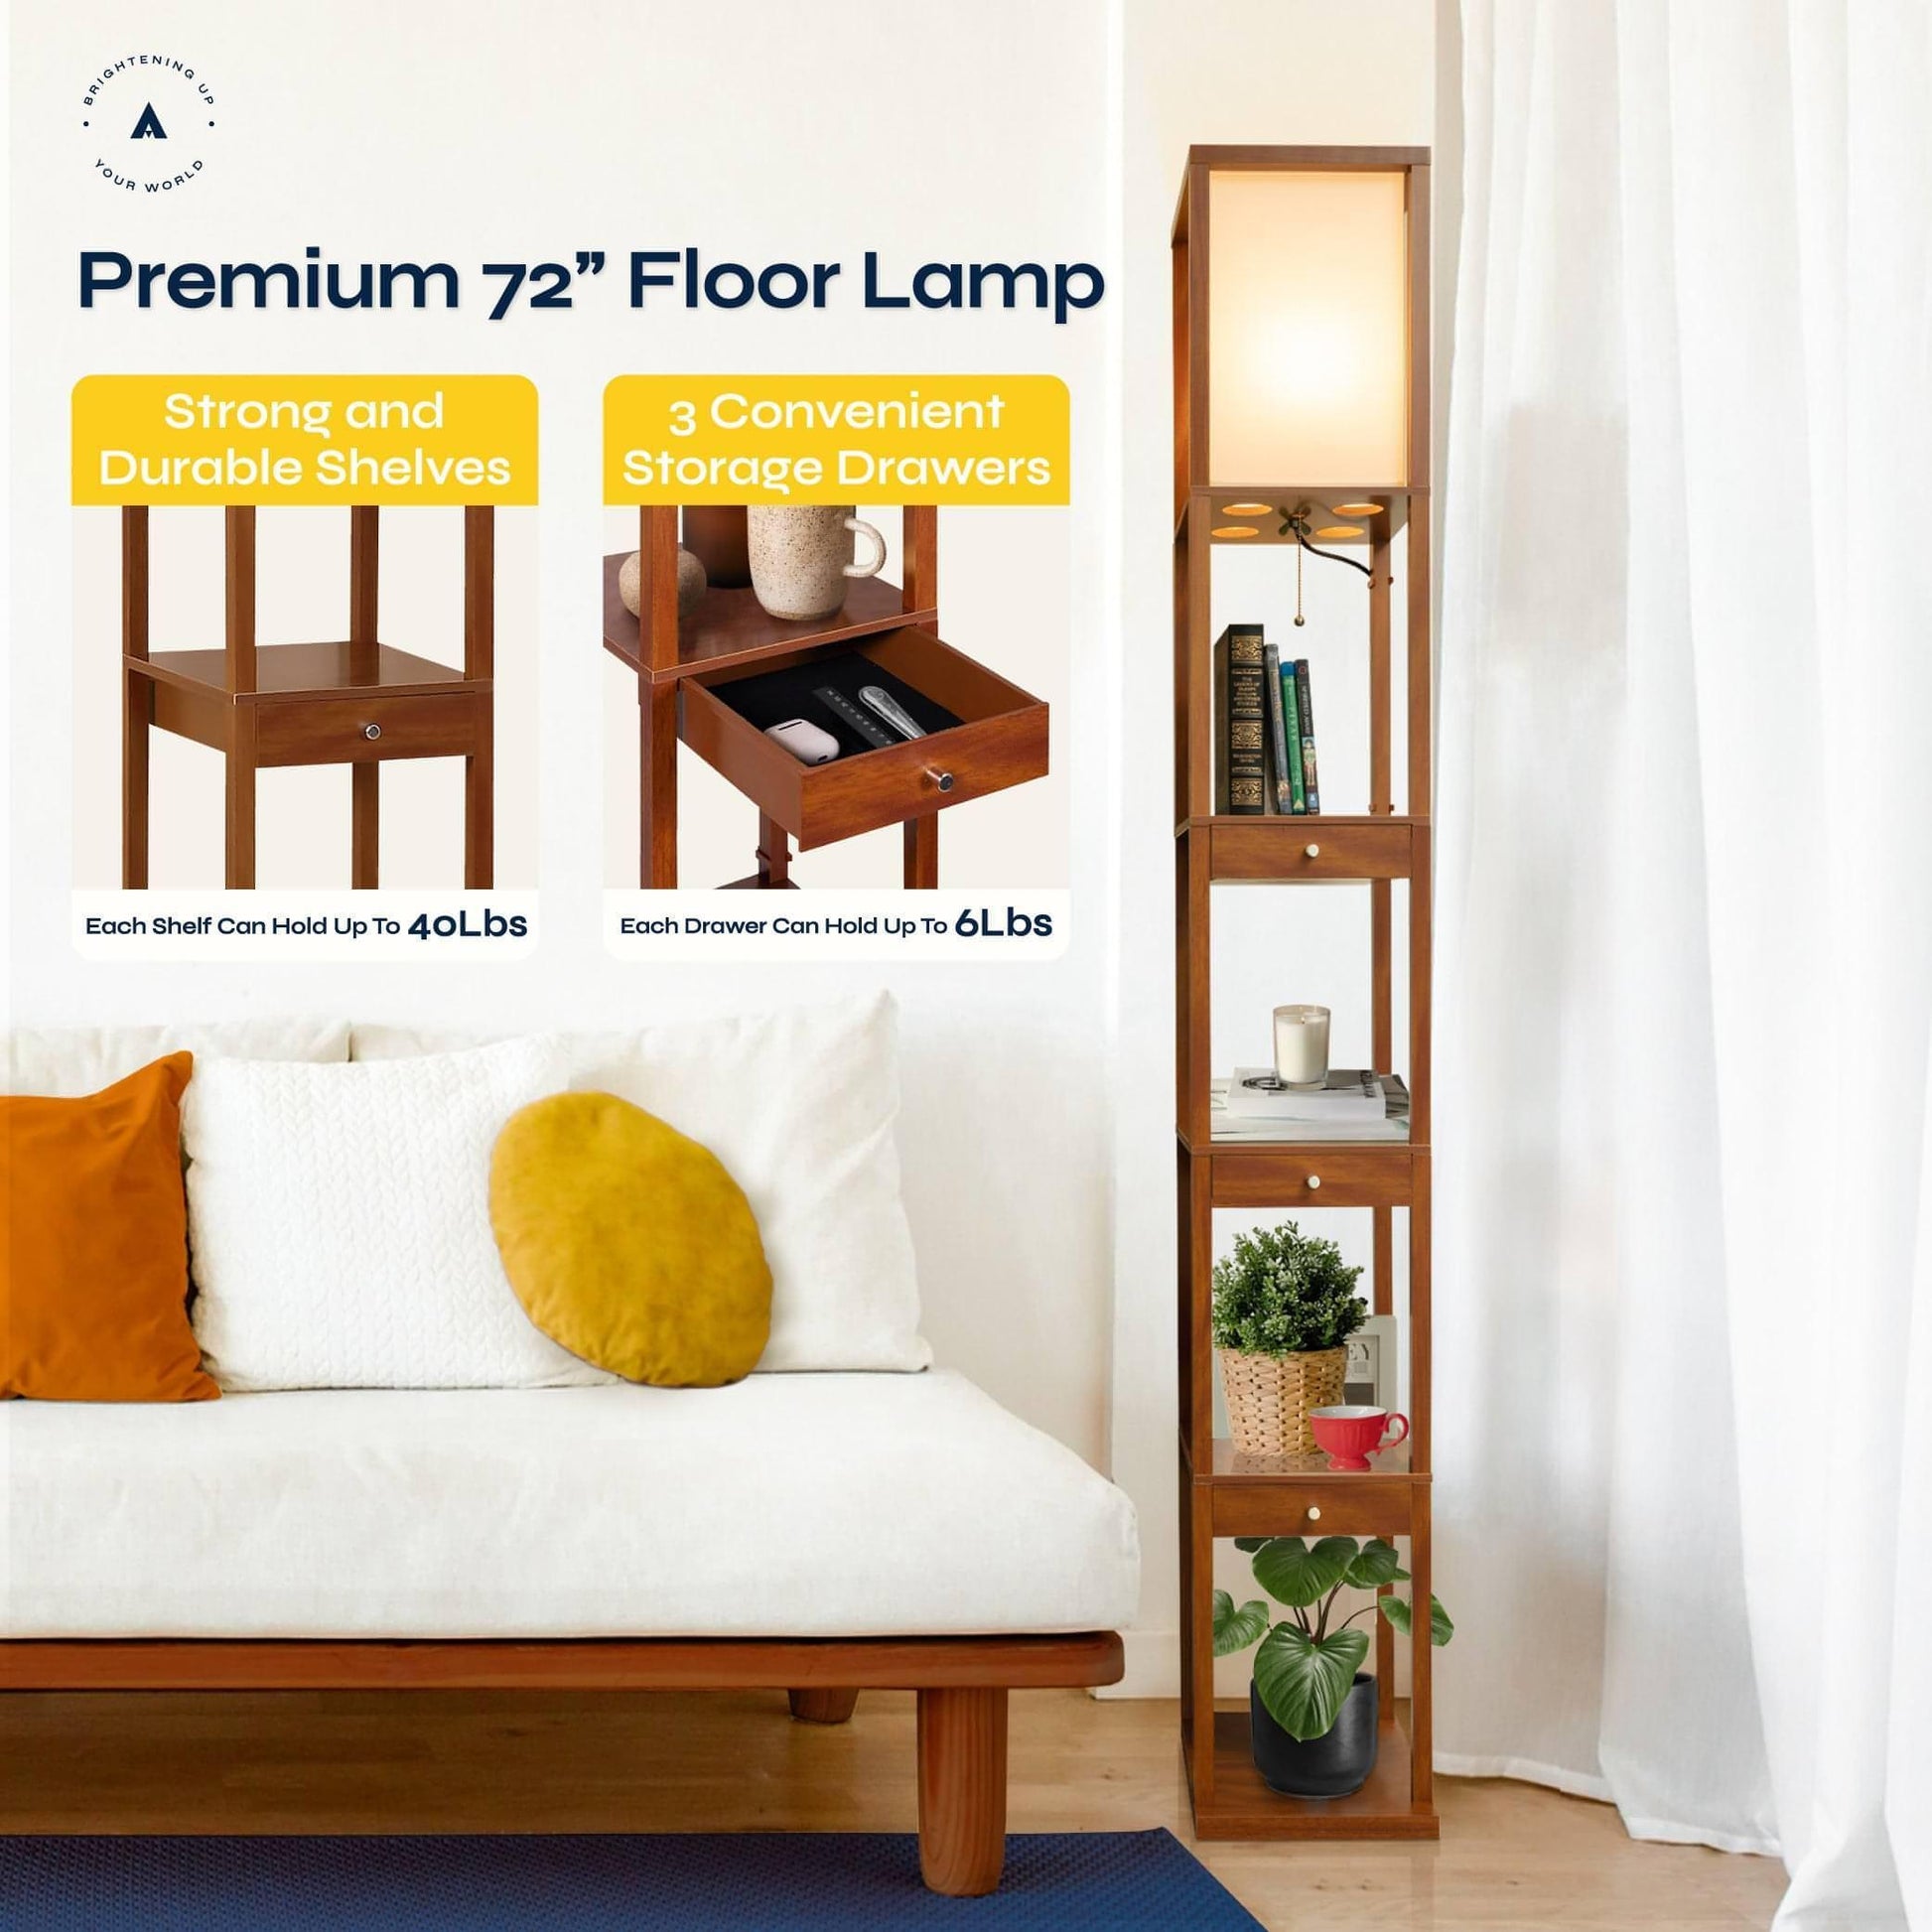 ATAMIN Aaron Classic LED Floor Lamp with Storage Drawers